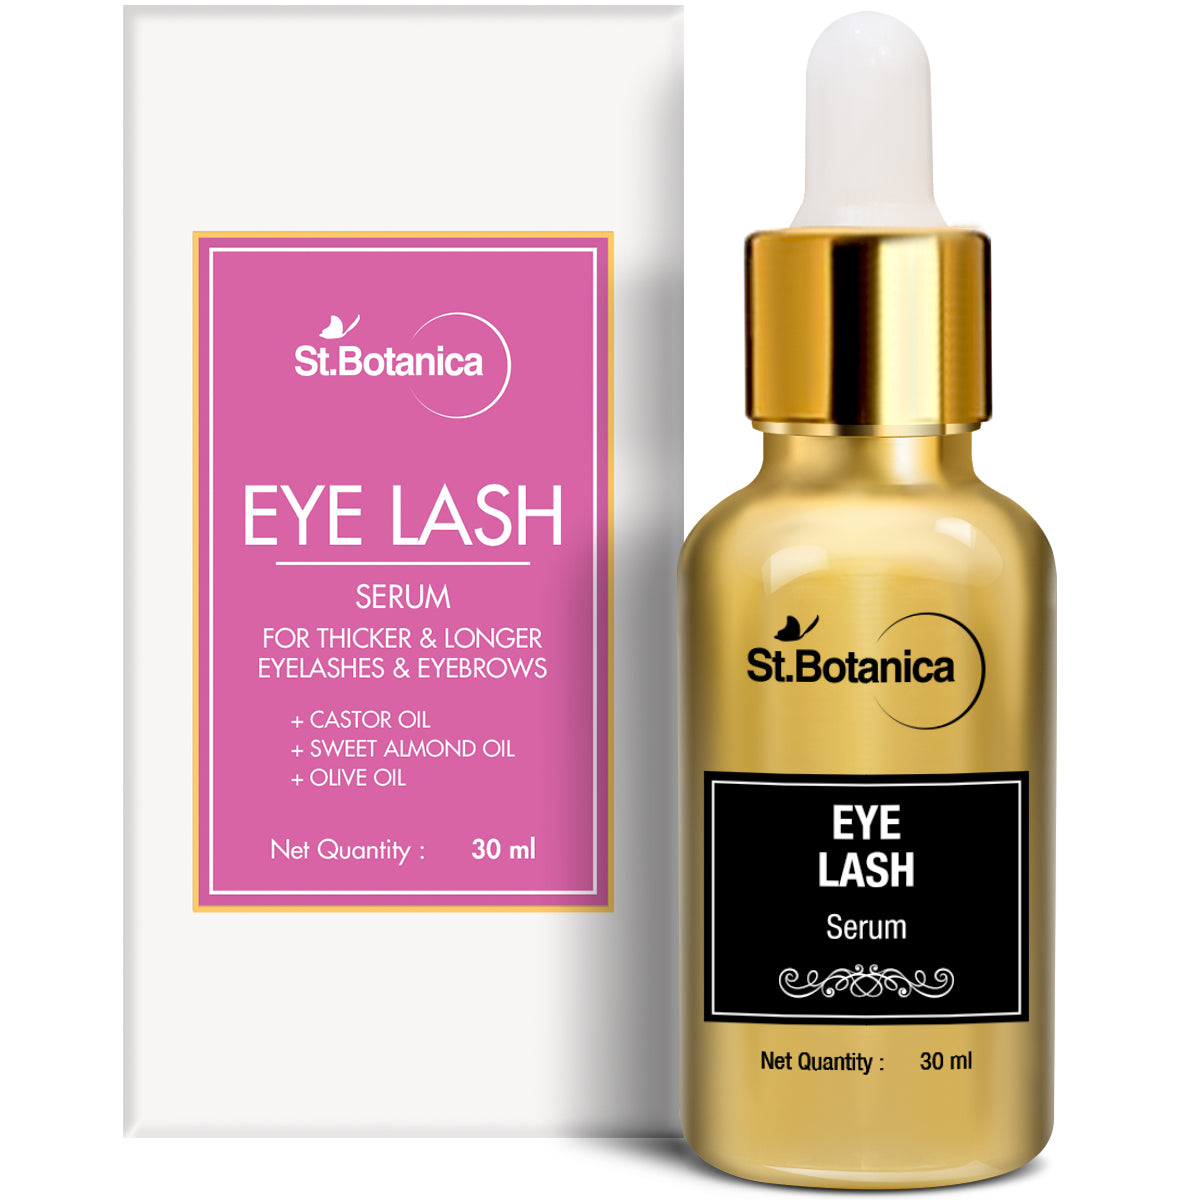 St.Botanica Eyelash Growth Serum - (With Castor Oil, 100% Pure and Natural Oils), 30 ml (STBOT496), 1 bottle